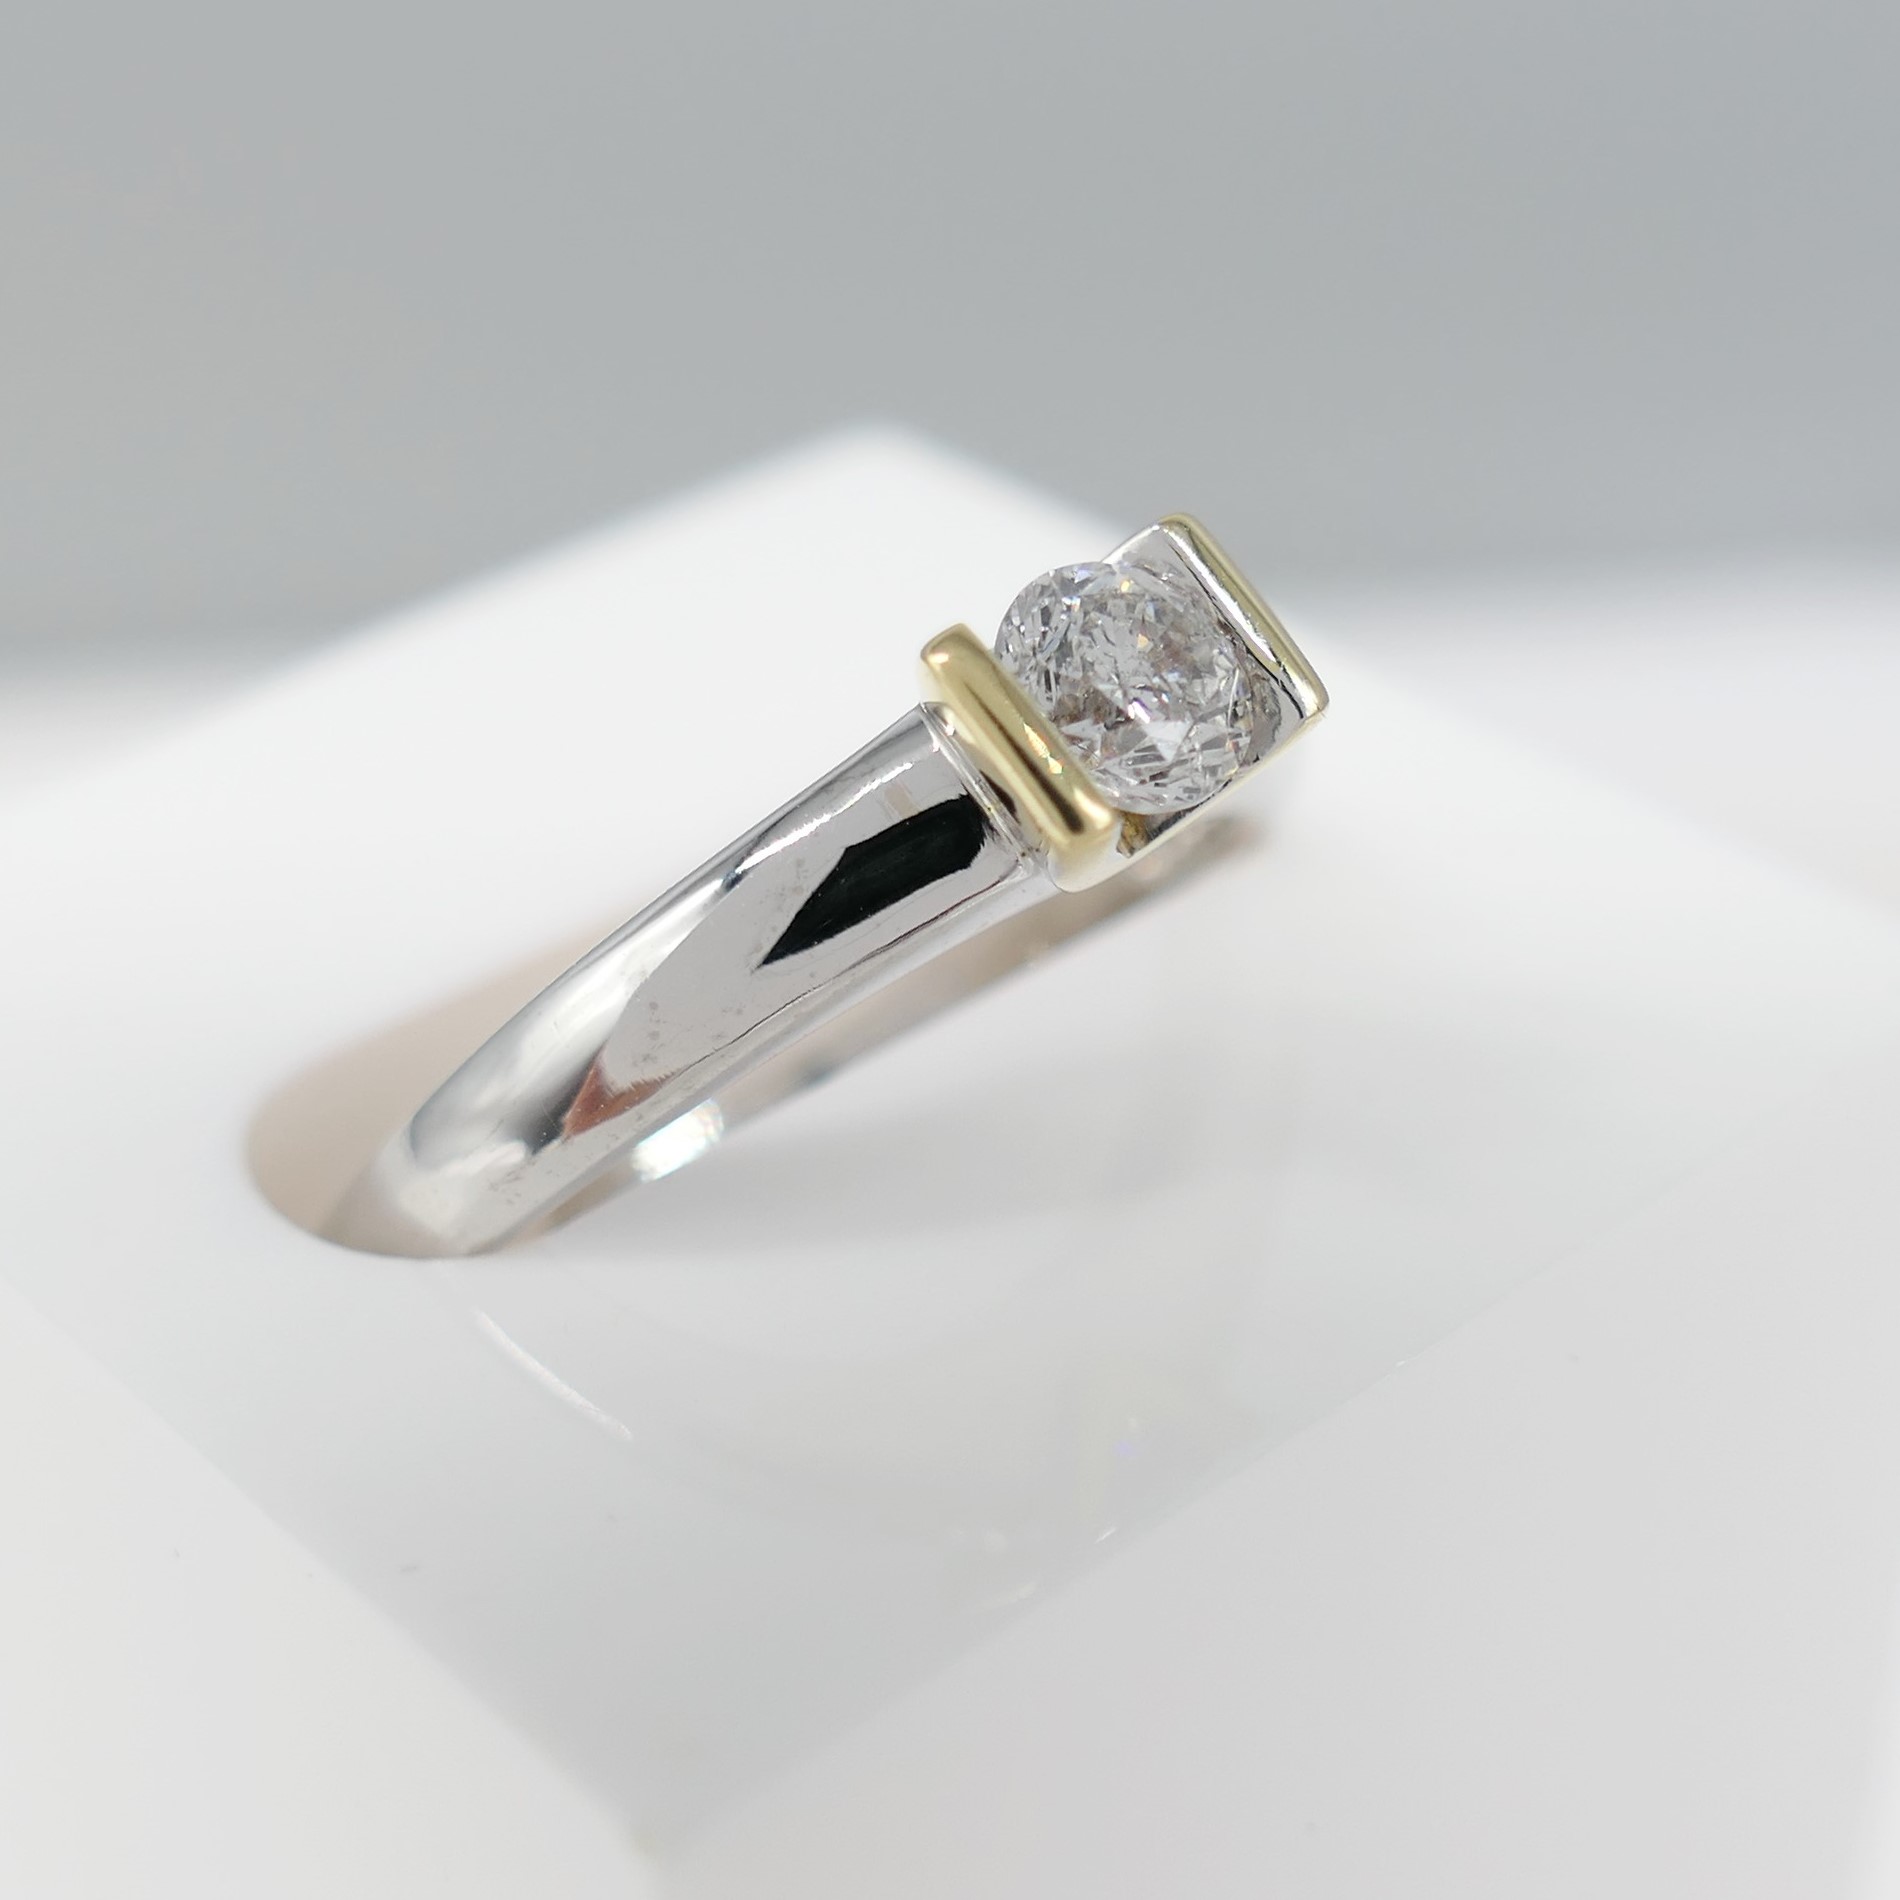 Contemporary 0.33 Carat Diamond Solitaire Ring In White and Yellow Gold, With Certificate - Image 5 of 6